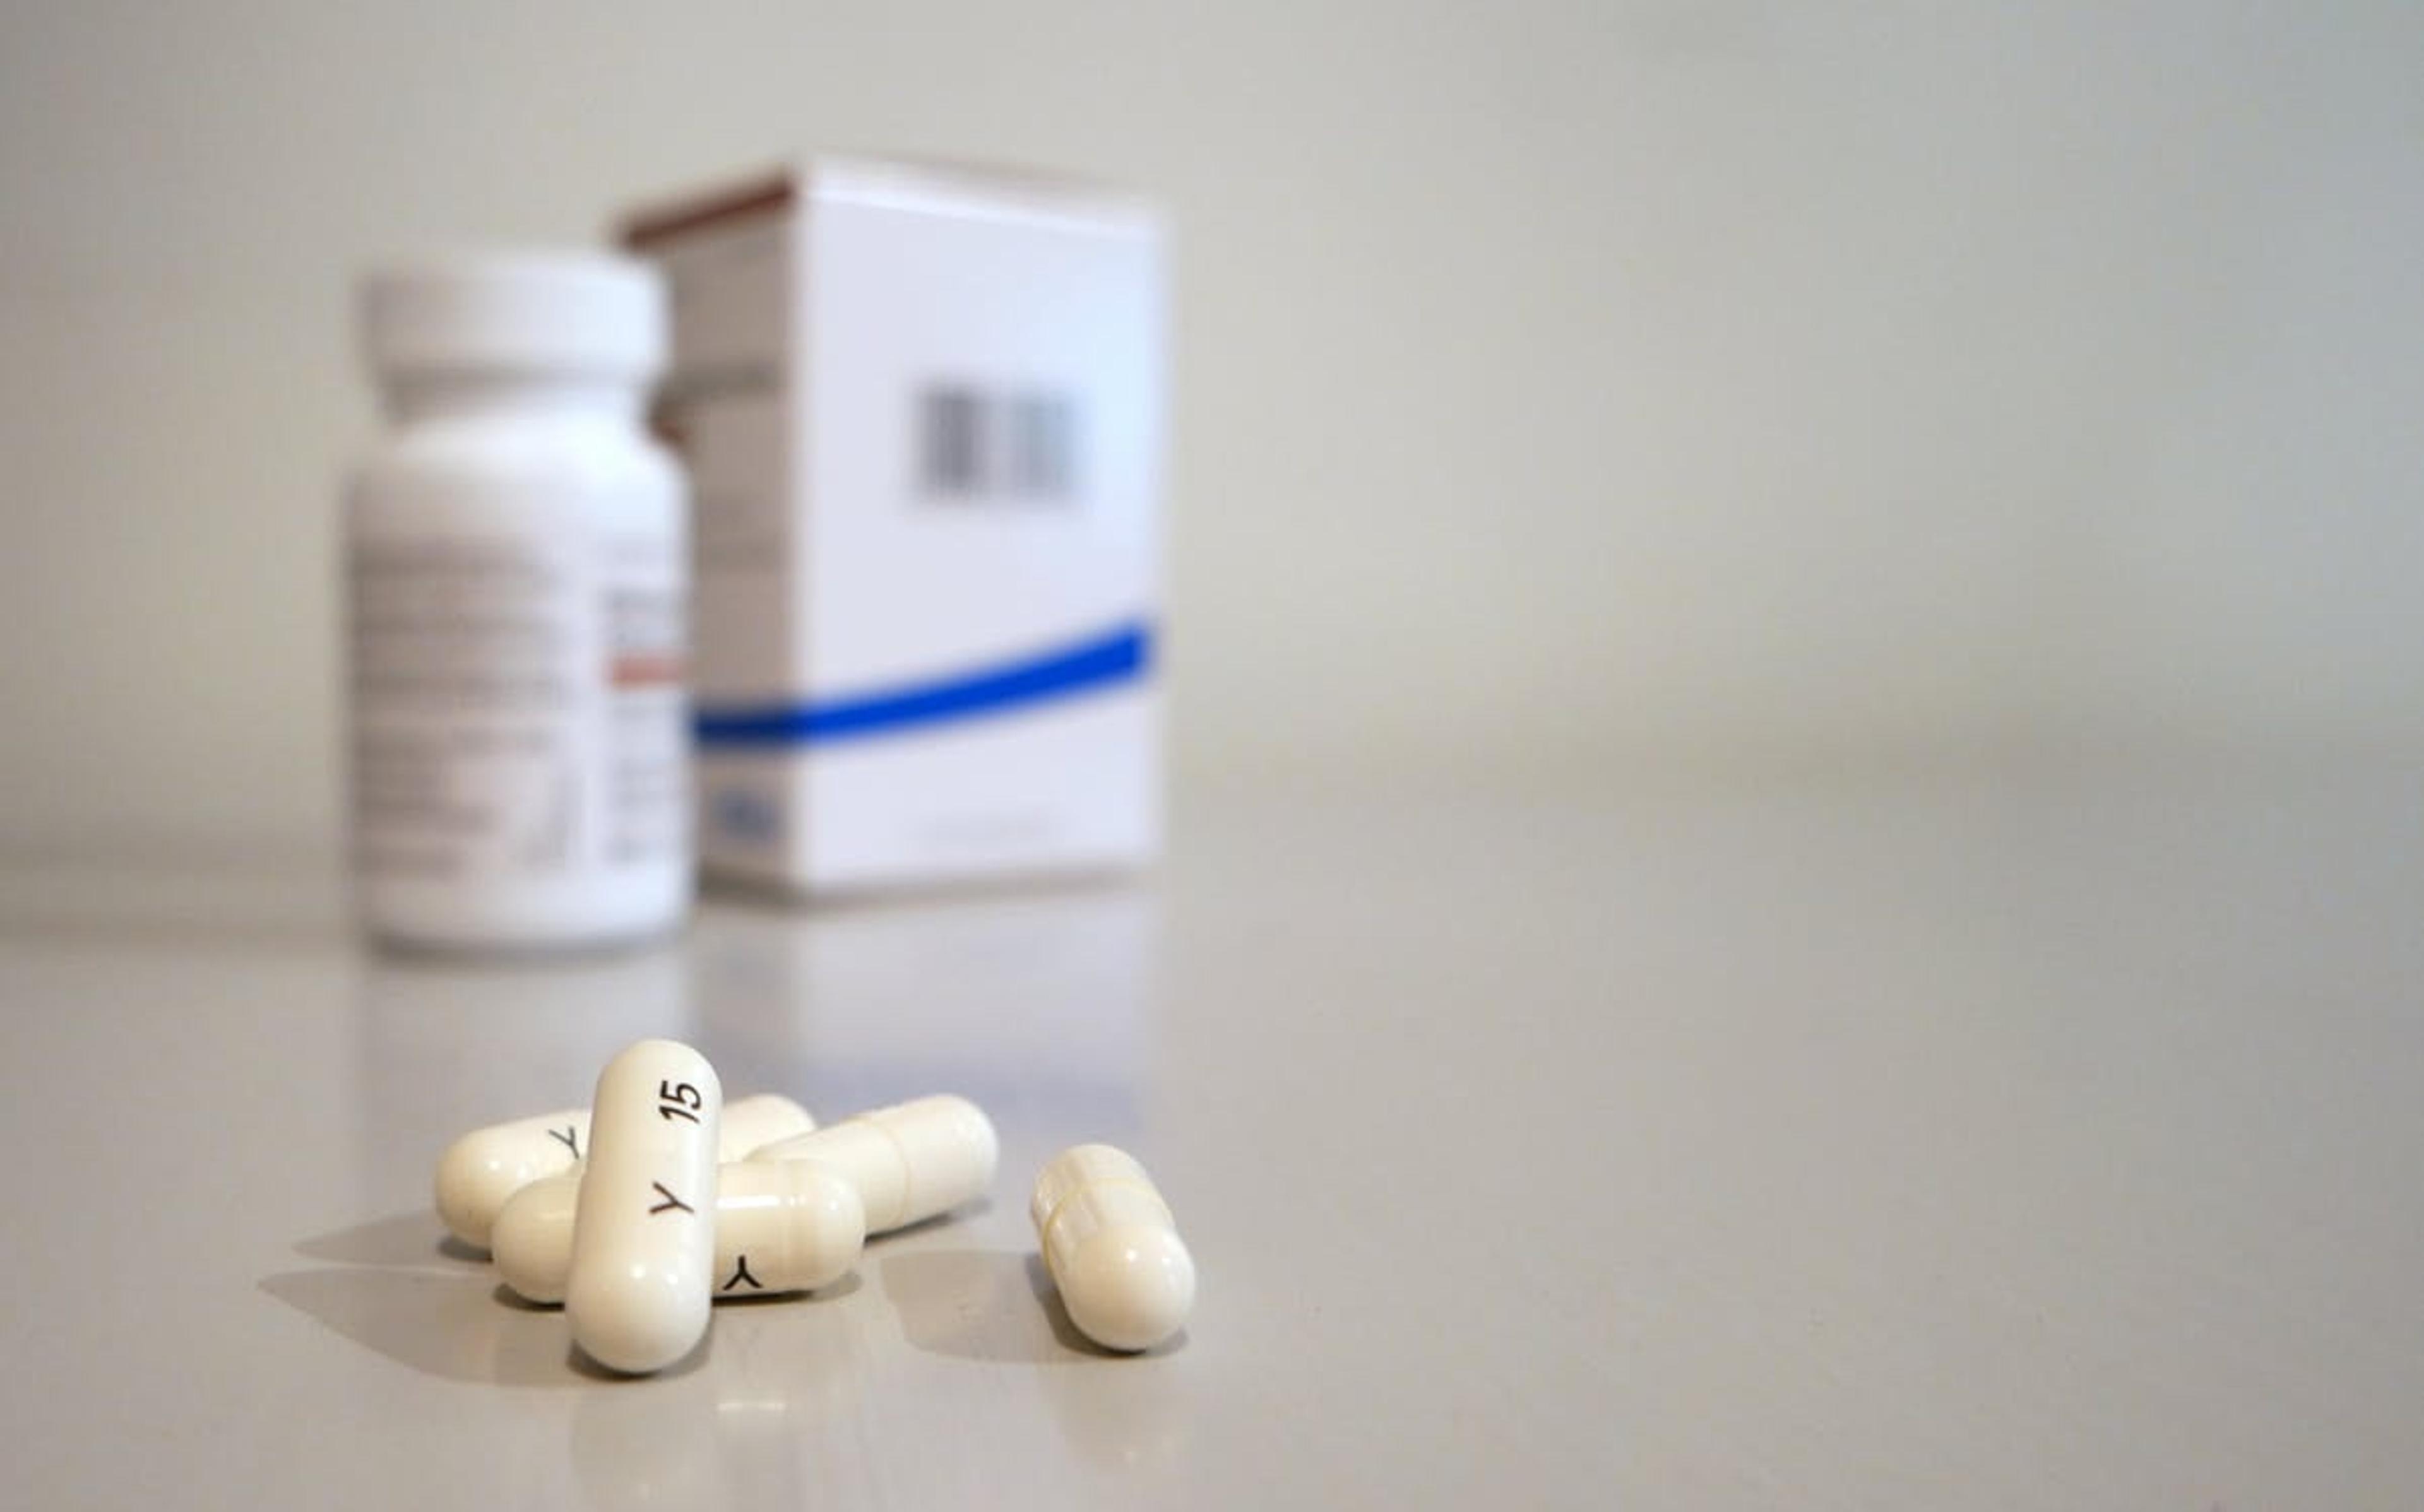 Prescription Drug Advertisements: What to Keep in Mind